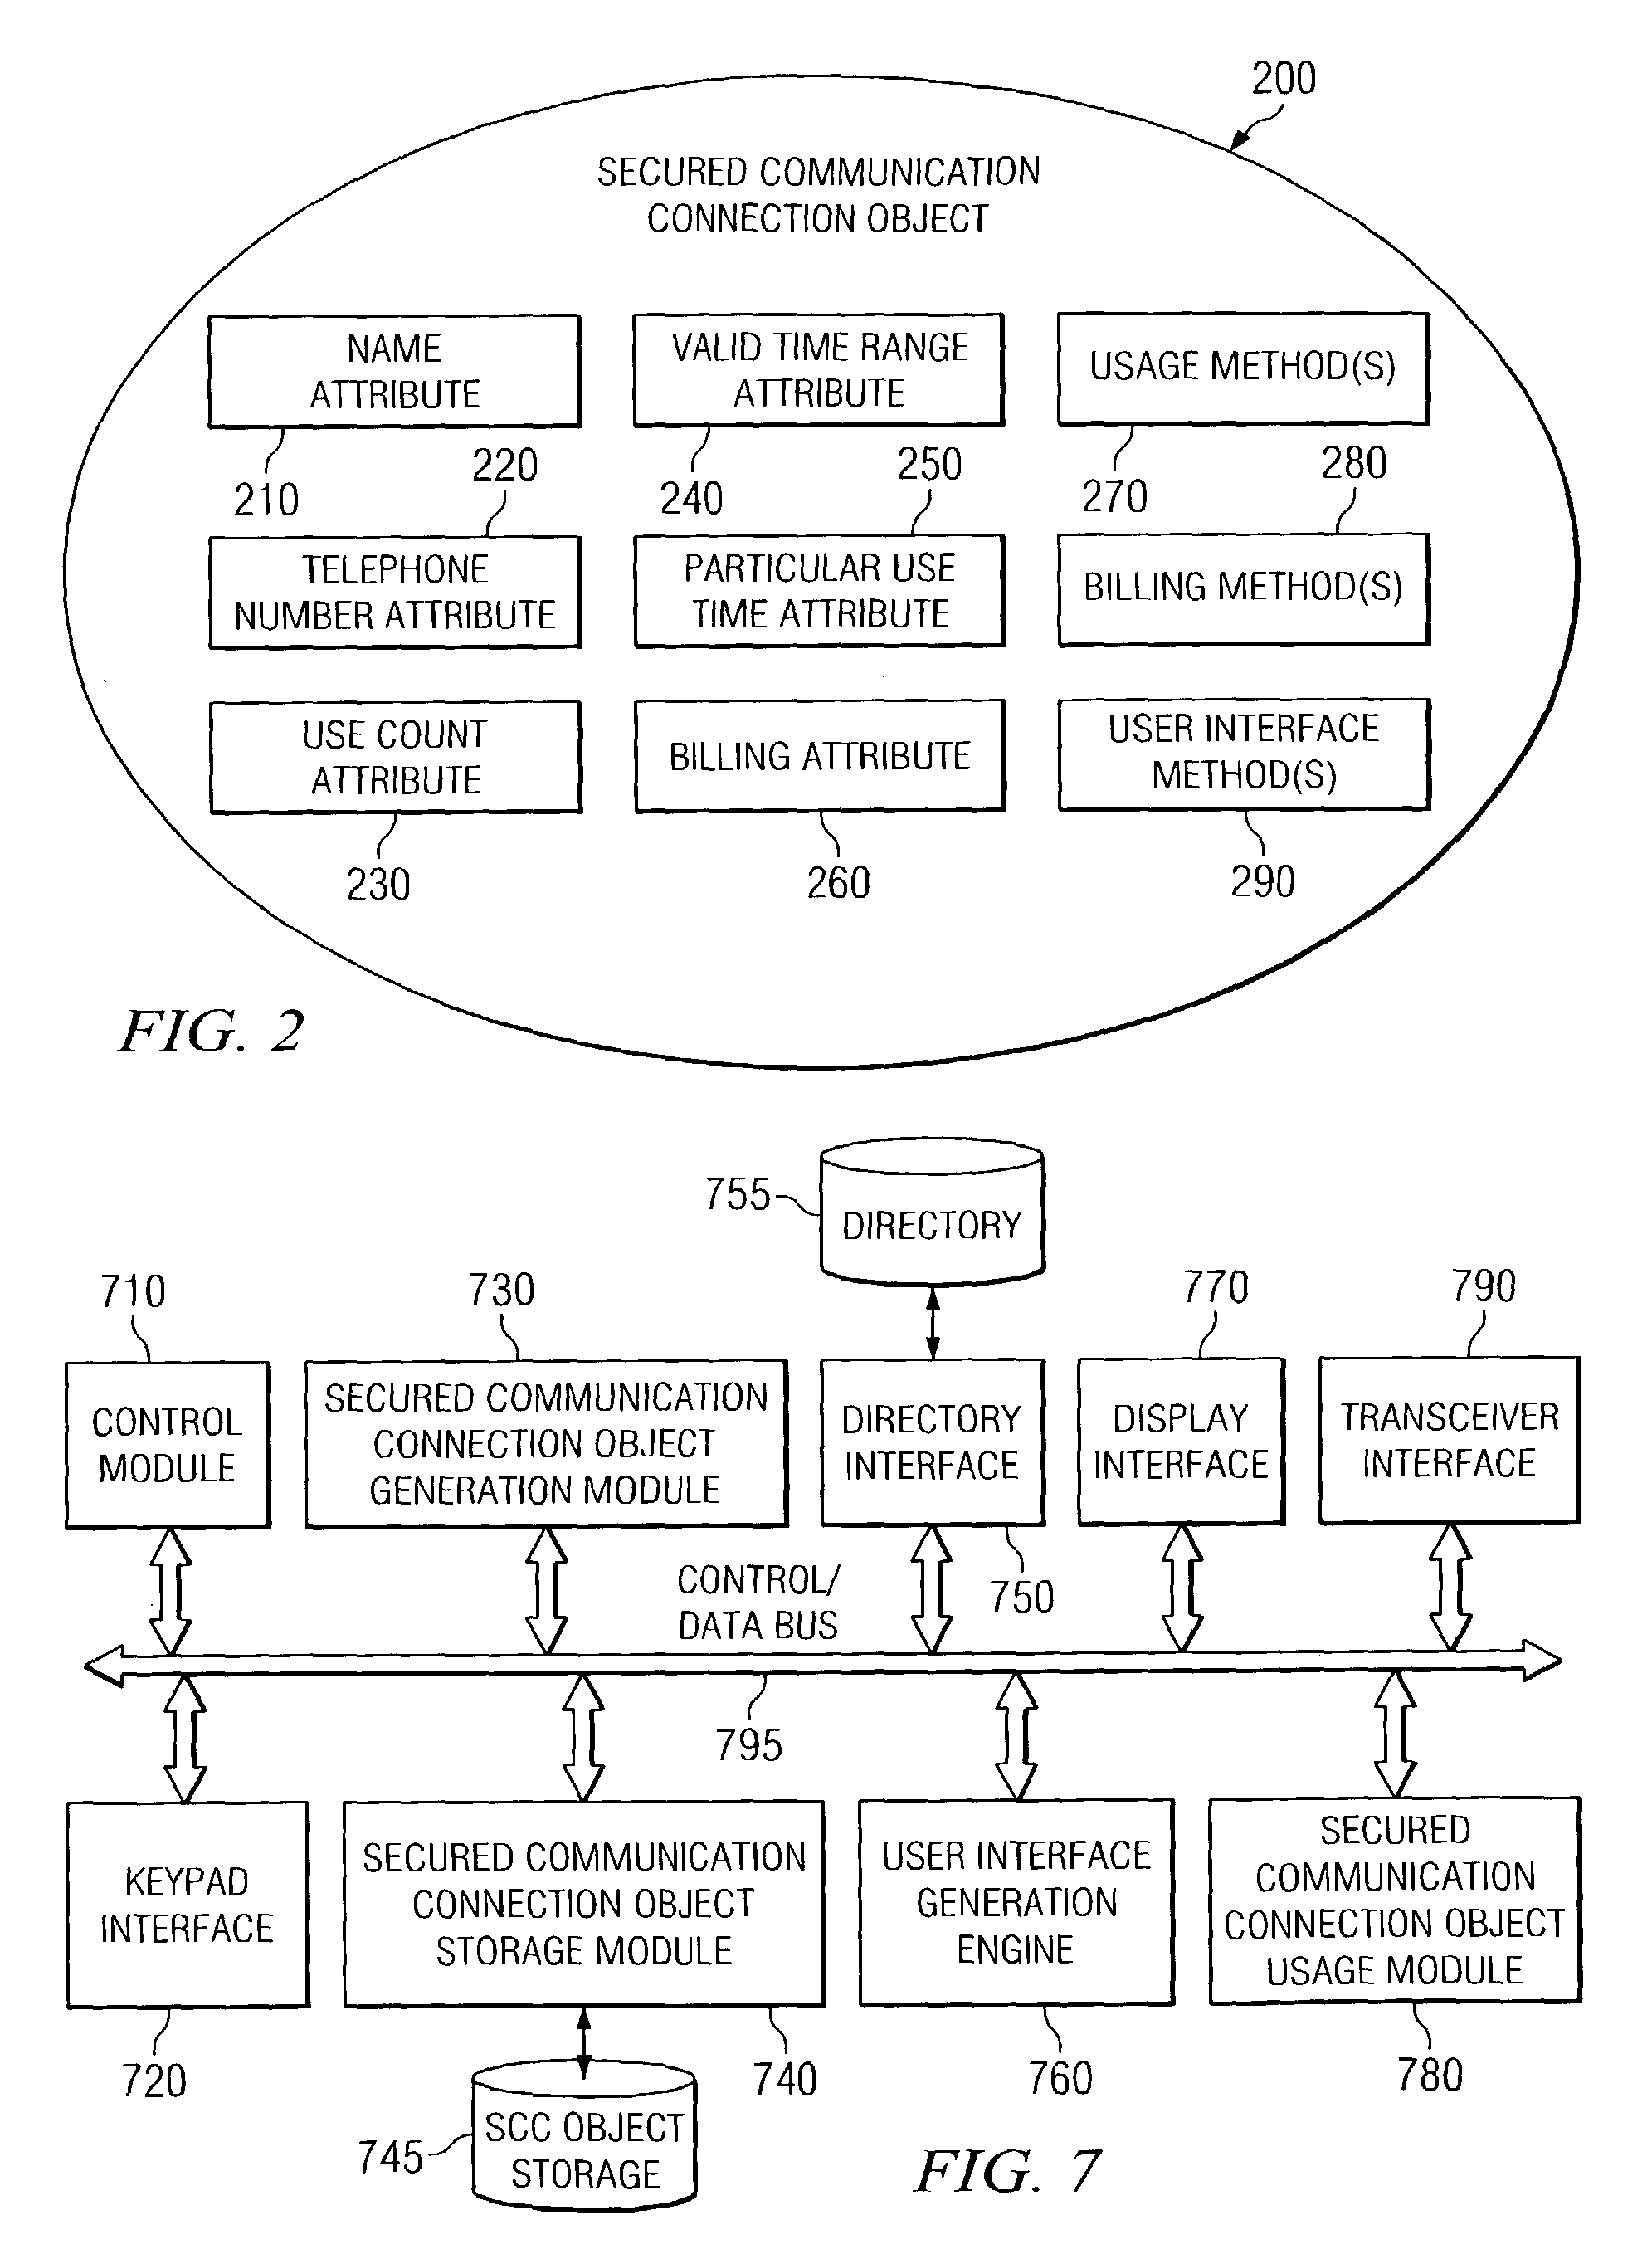 Method and apparatus for providing secured communication connections using a secured communication connection object